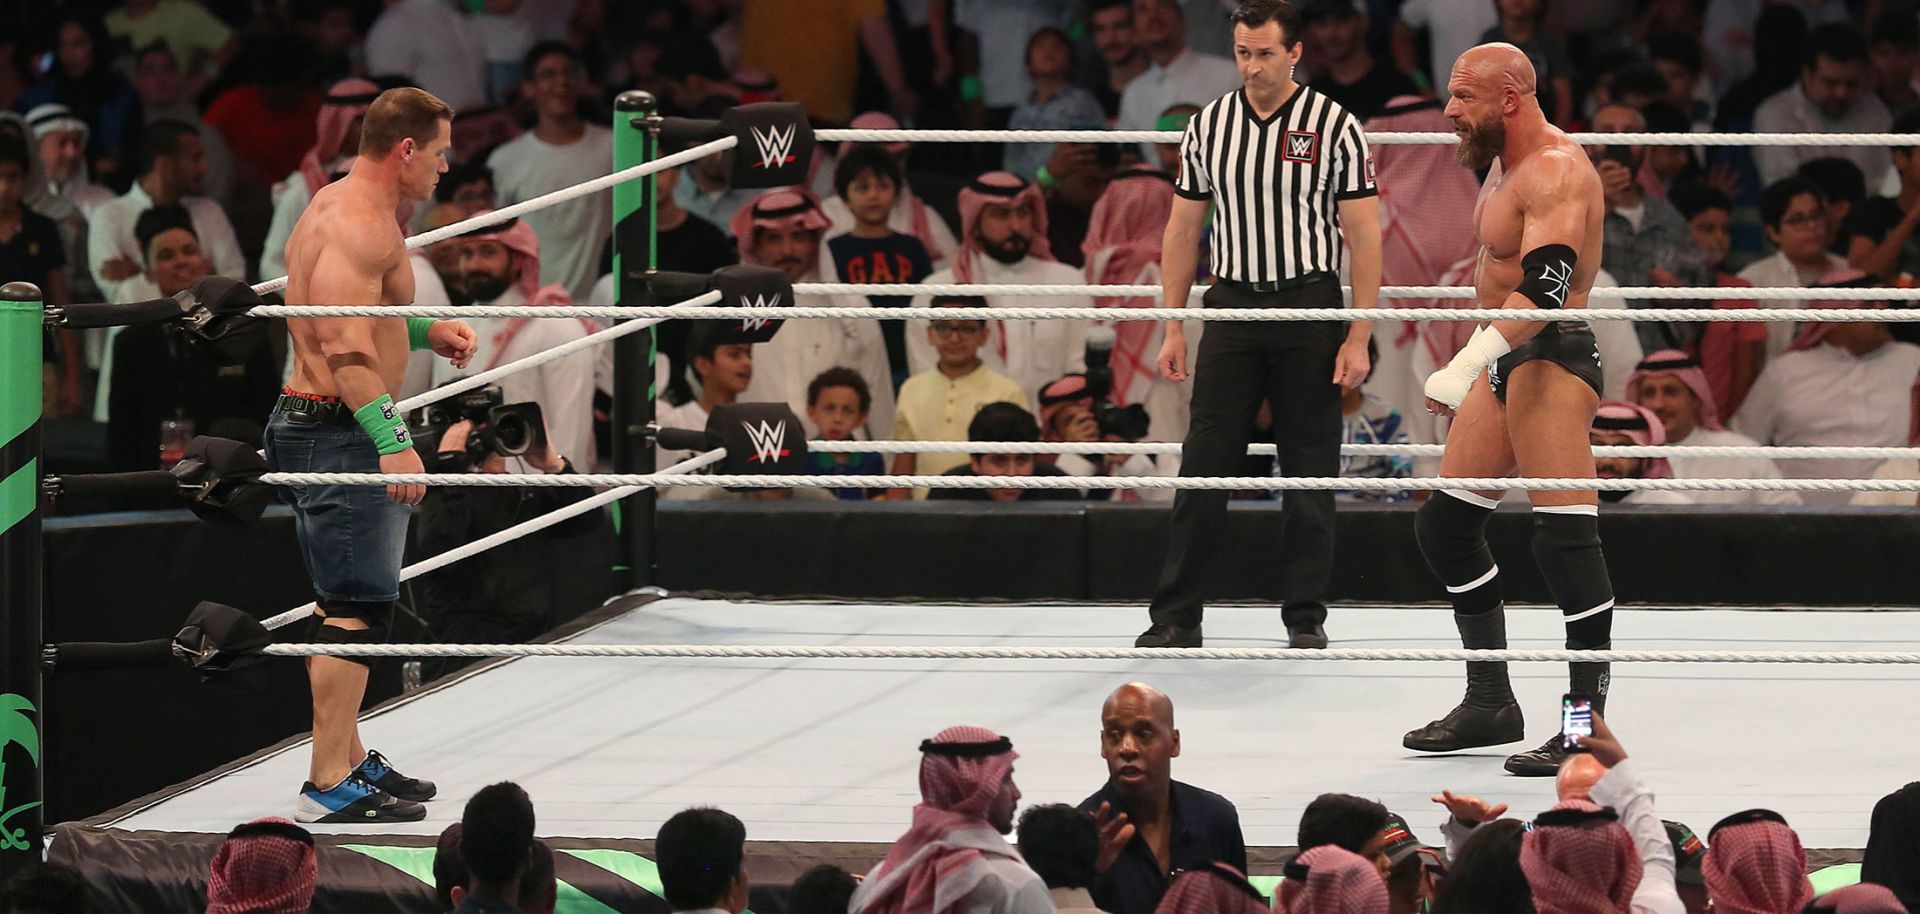 John Cena (L) competes with Triple H during the World Wrestling Entertainment (WWE) Greatest Royal Rumble event in Jeddah on April 27. 